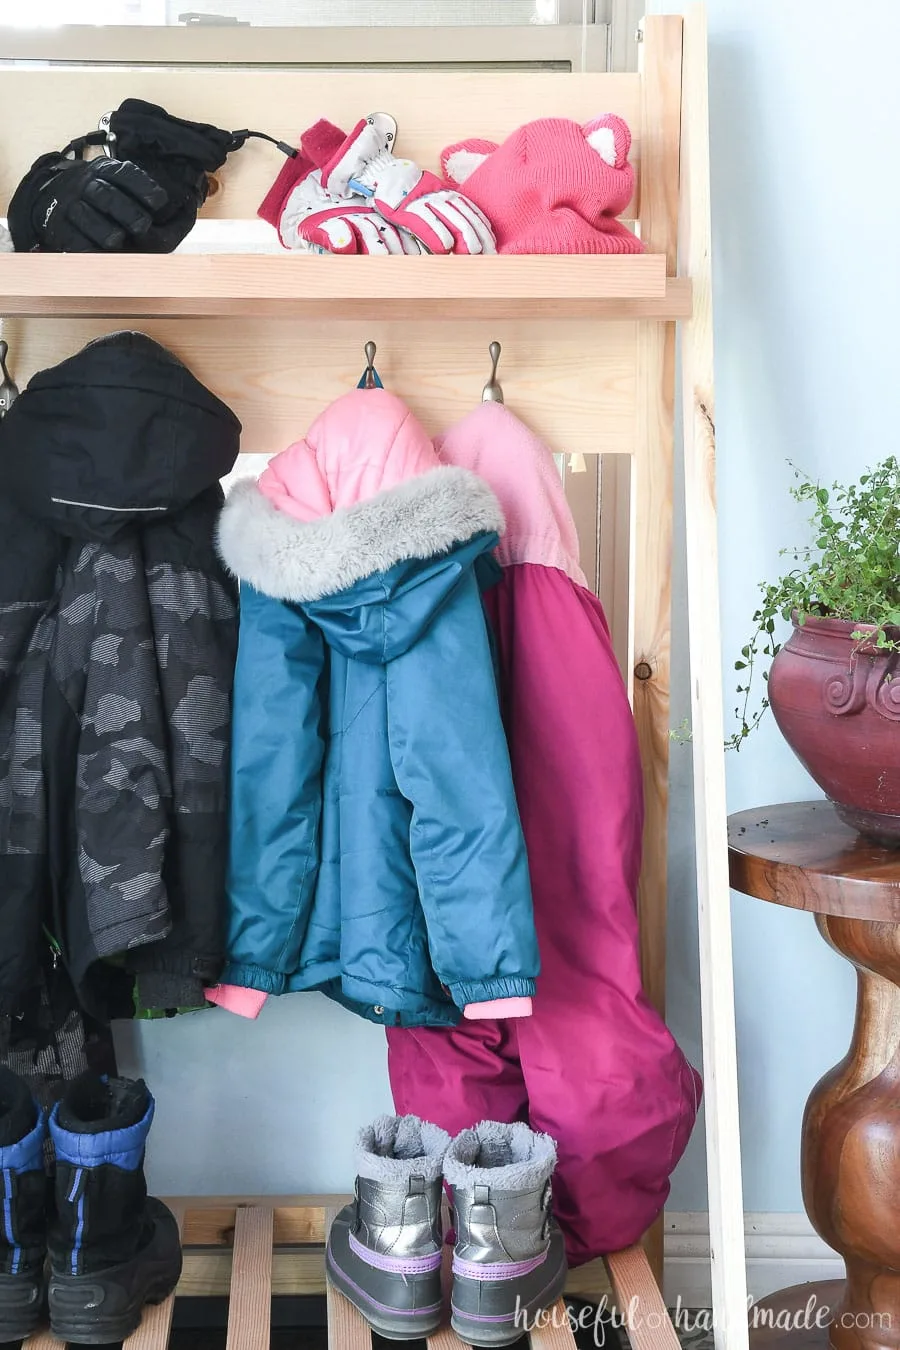 View of the fold-away mudroom shelves with coats and winter gear hanging on it. 